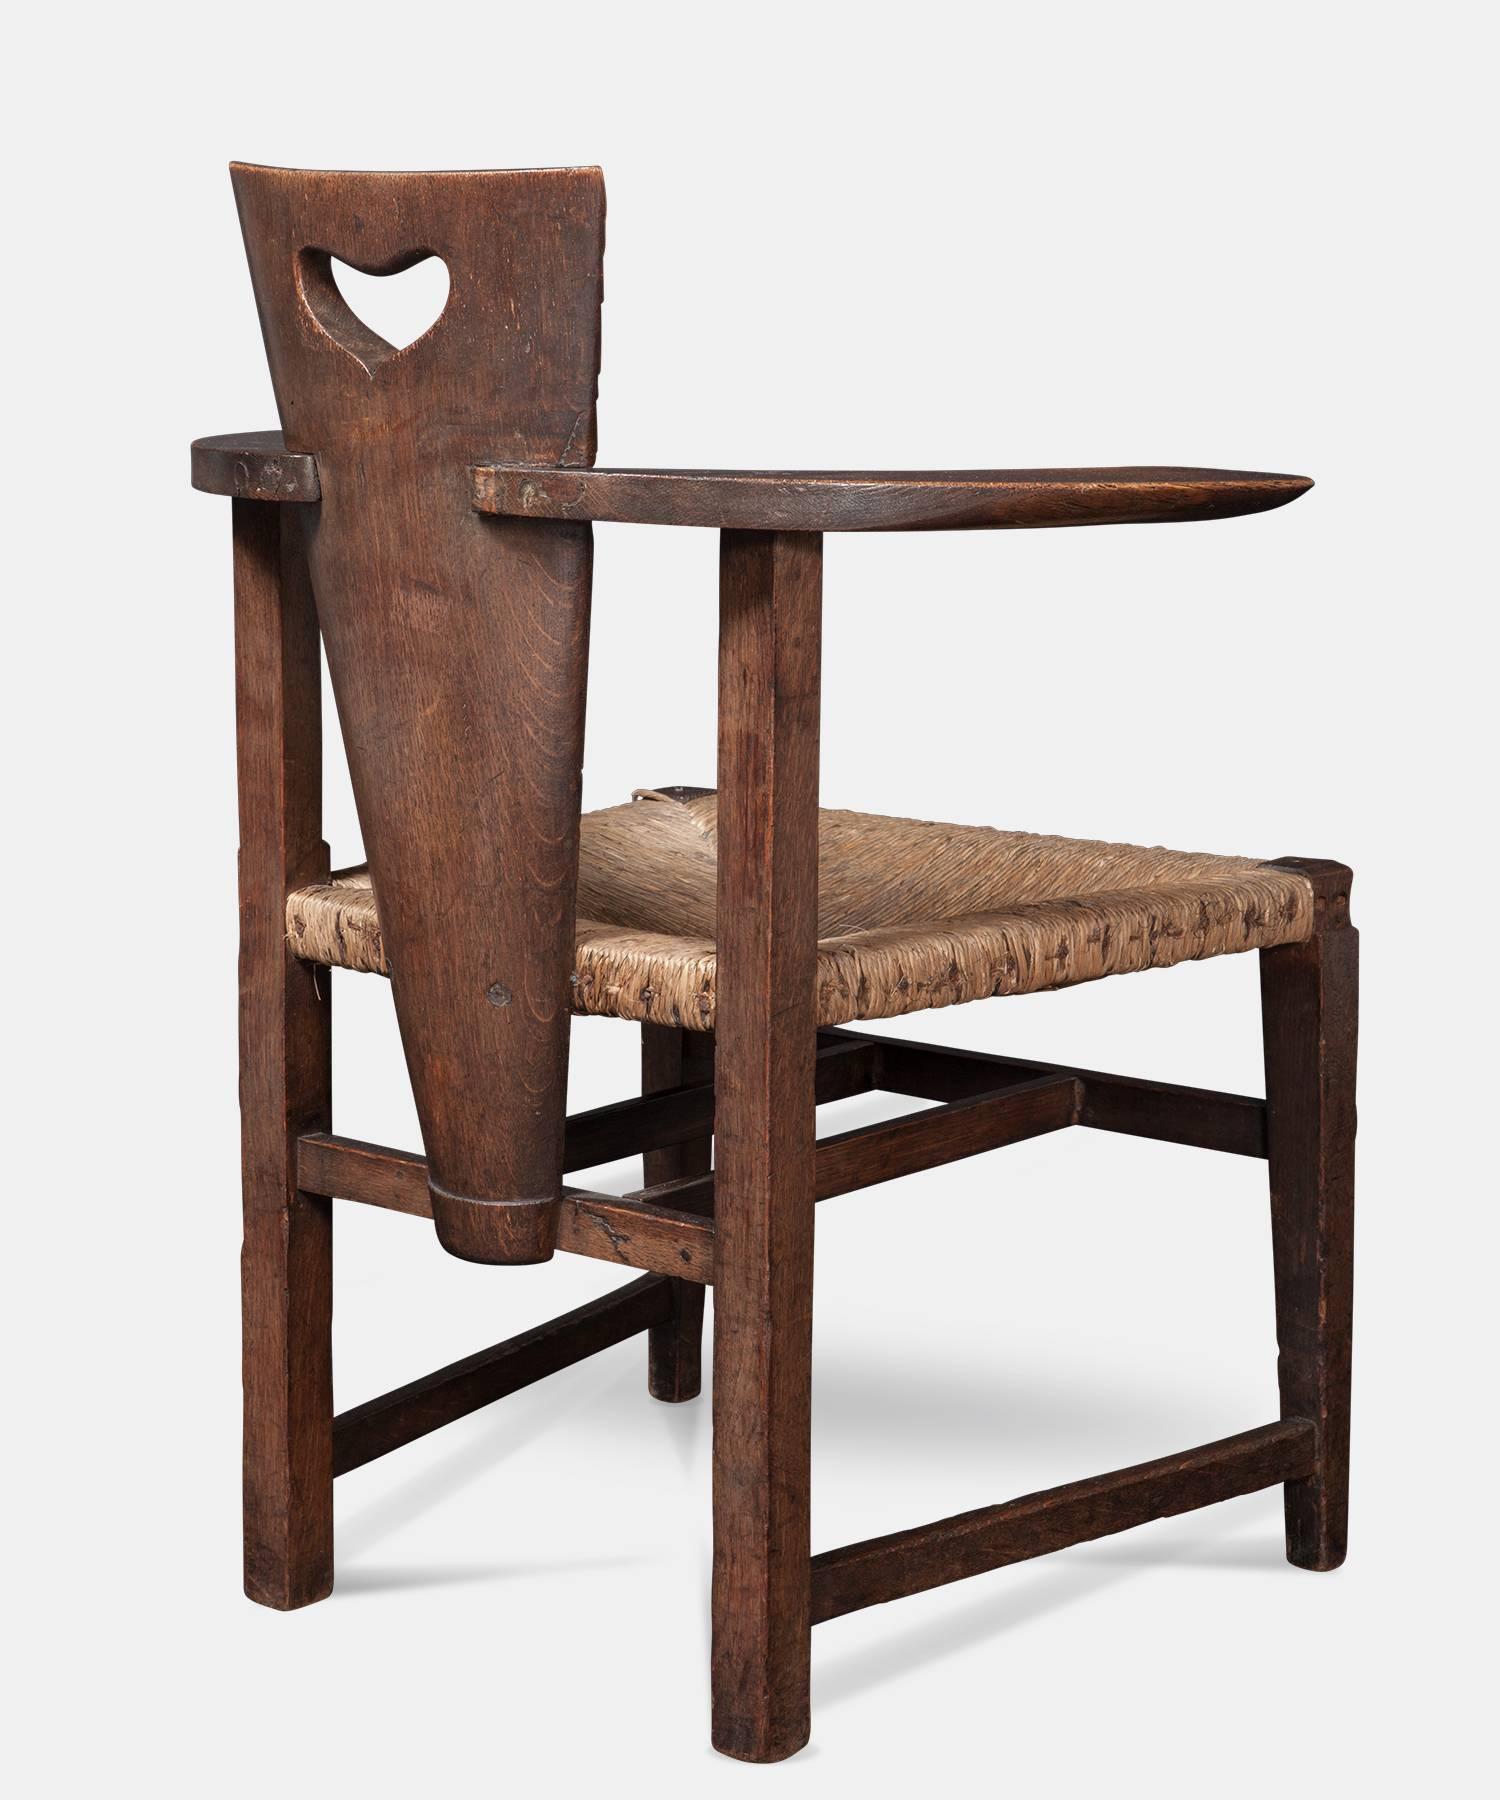 Country George Walton Ash and Rush-Seat Abingwood Elbow Chair, circa 1897